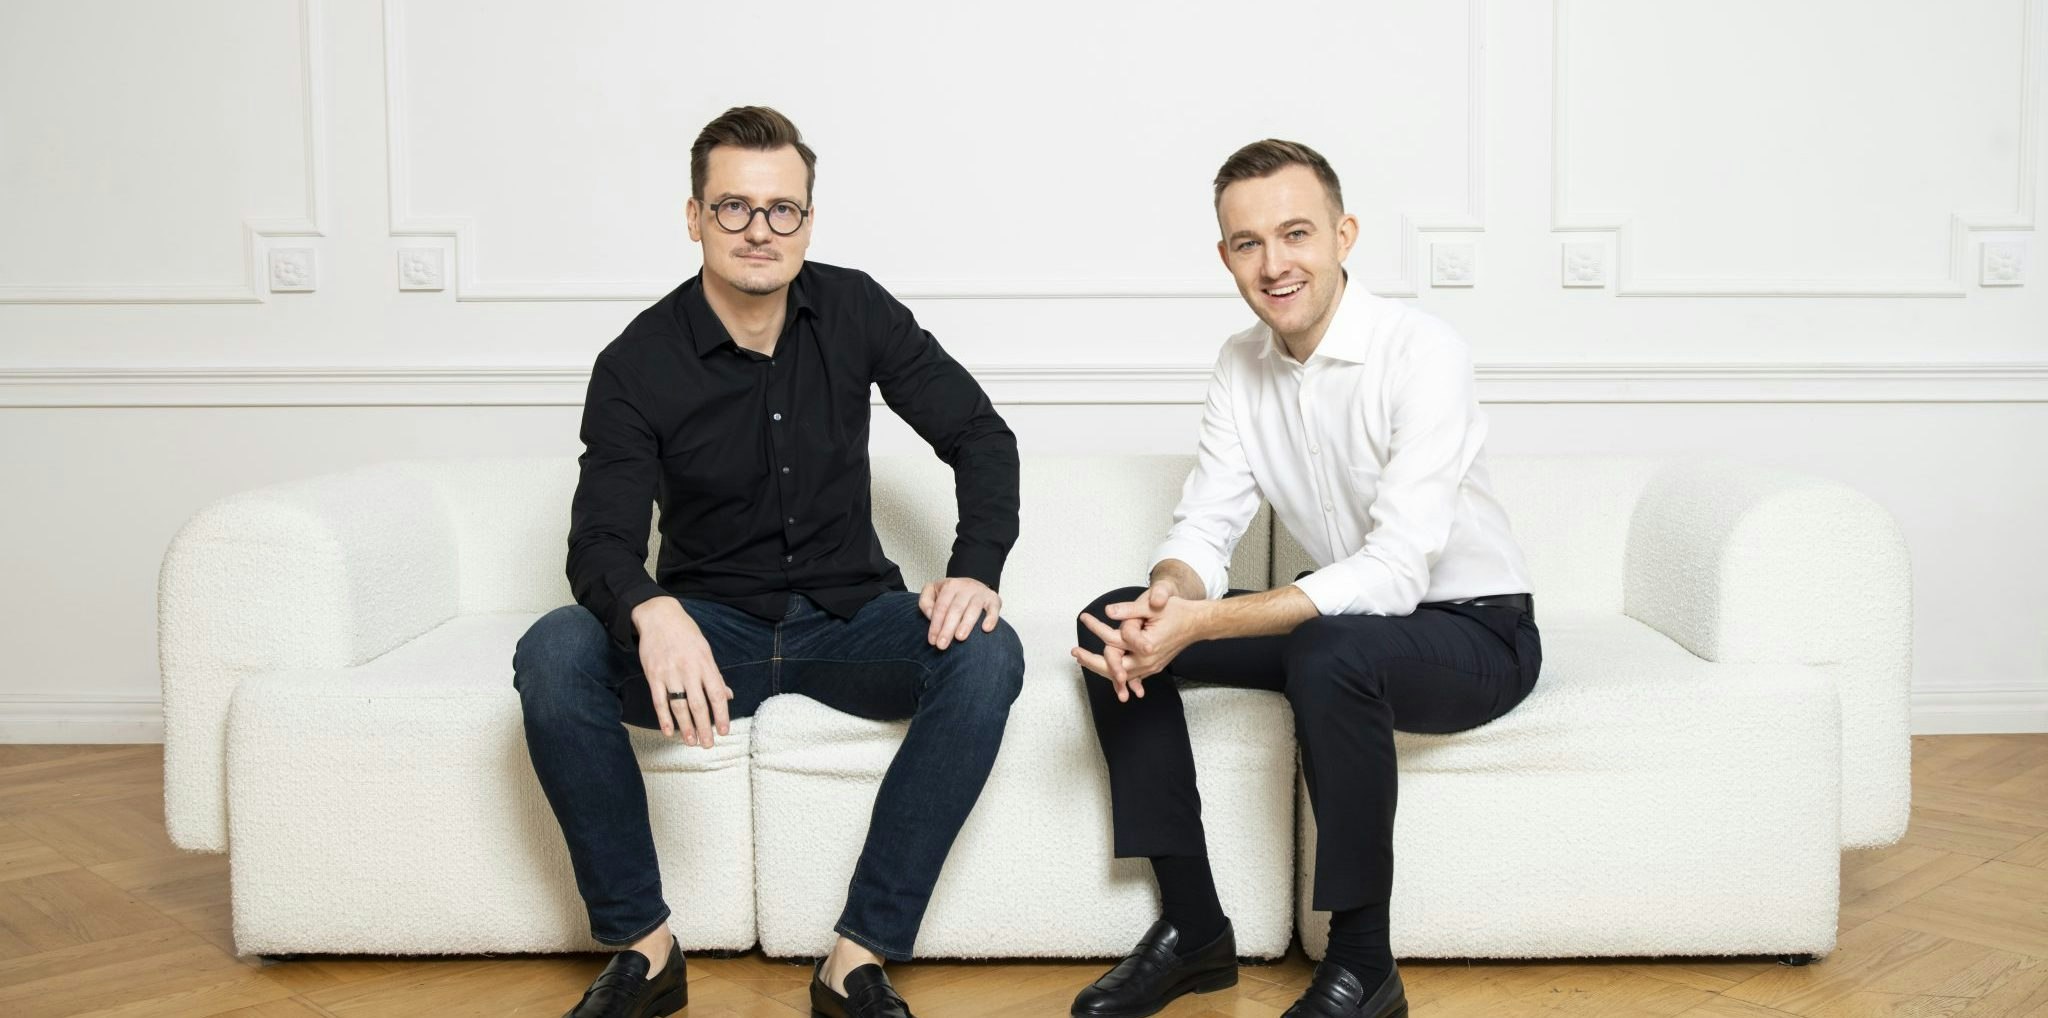 Poland’s bValue raises €72m to invest in later stage startups from CEE